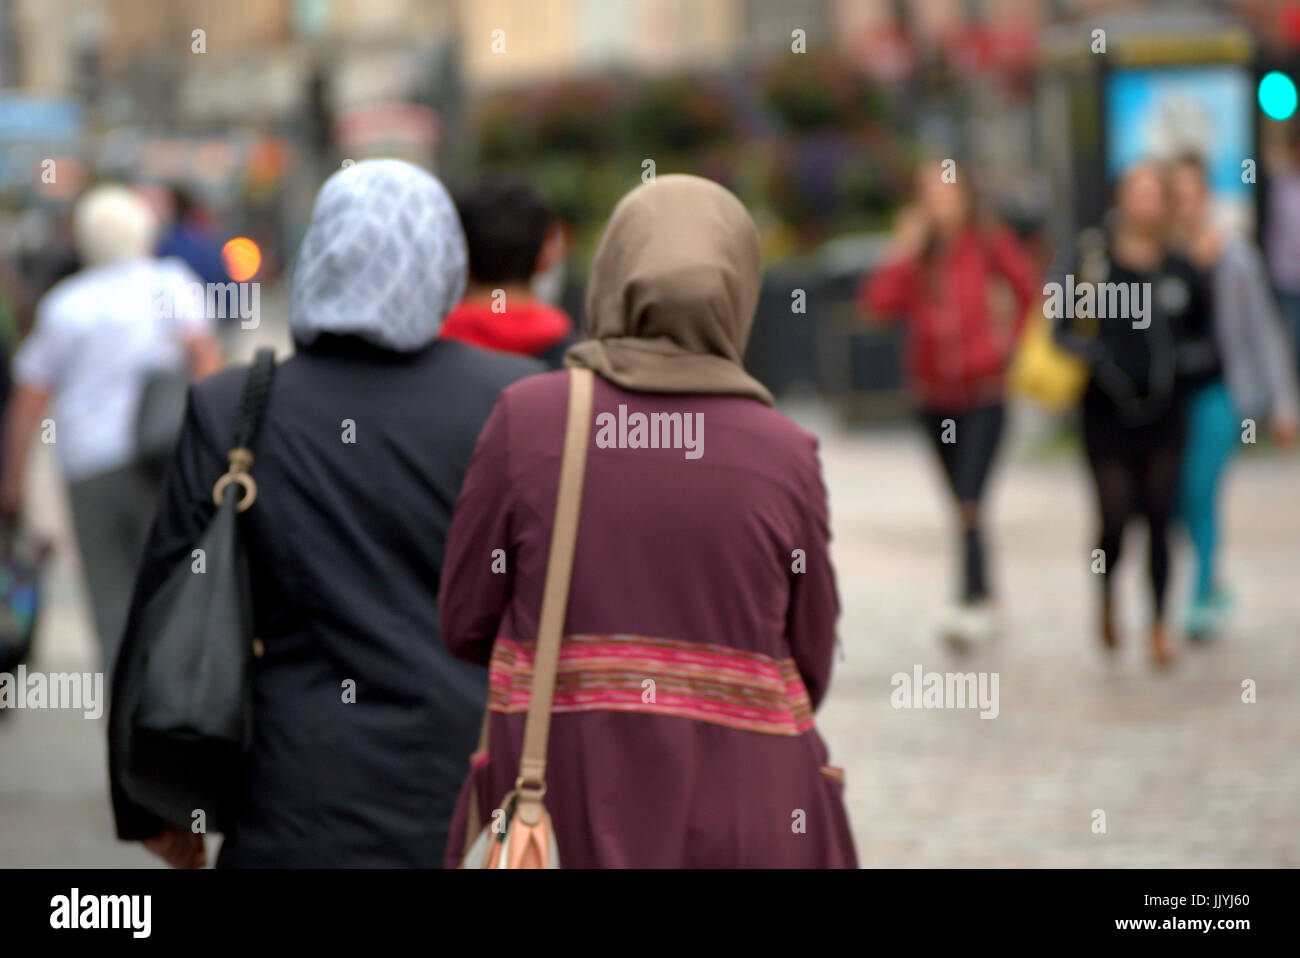 Asian refugee dressed Hijab scarf on street in the UK everyday scene victim threatened young white girls Stock Photo